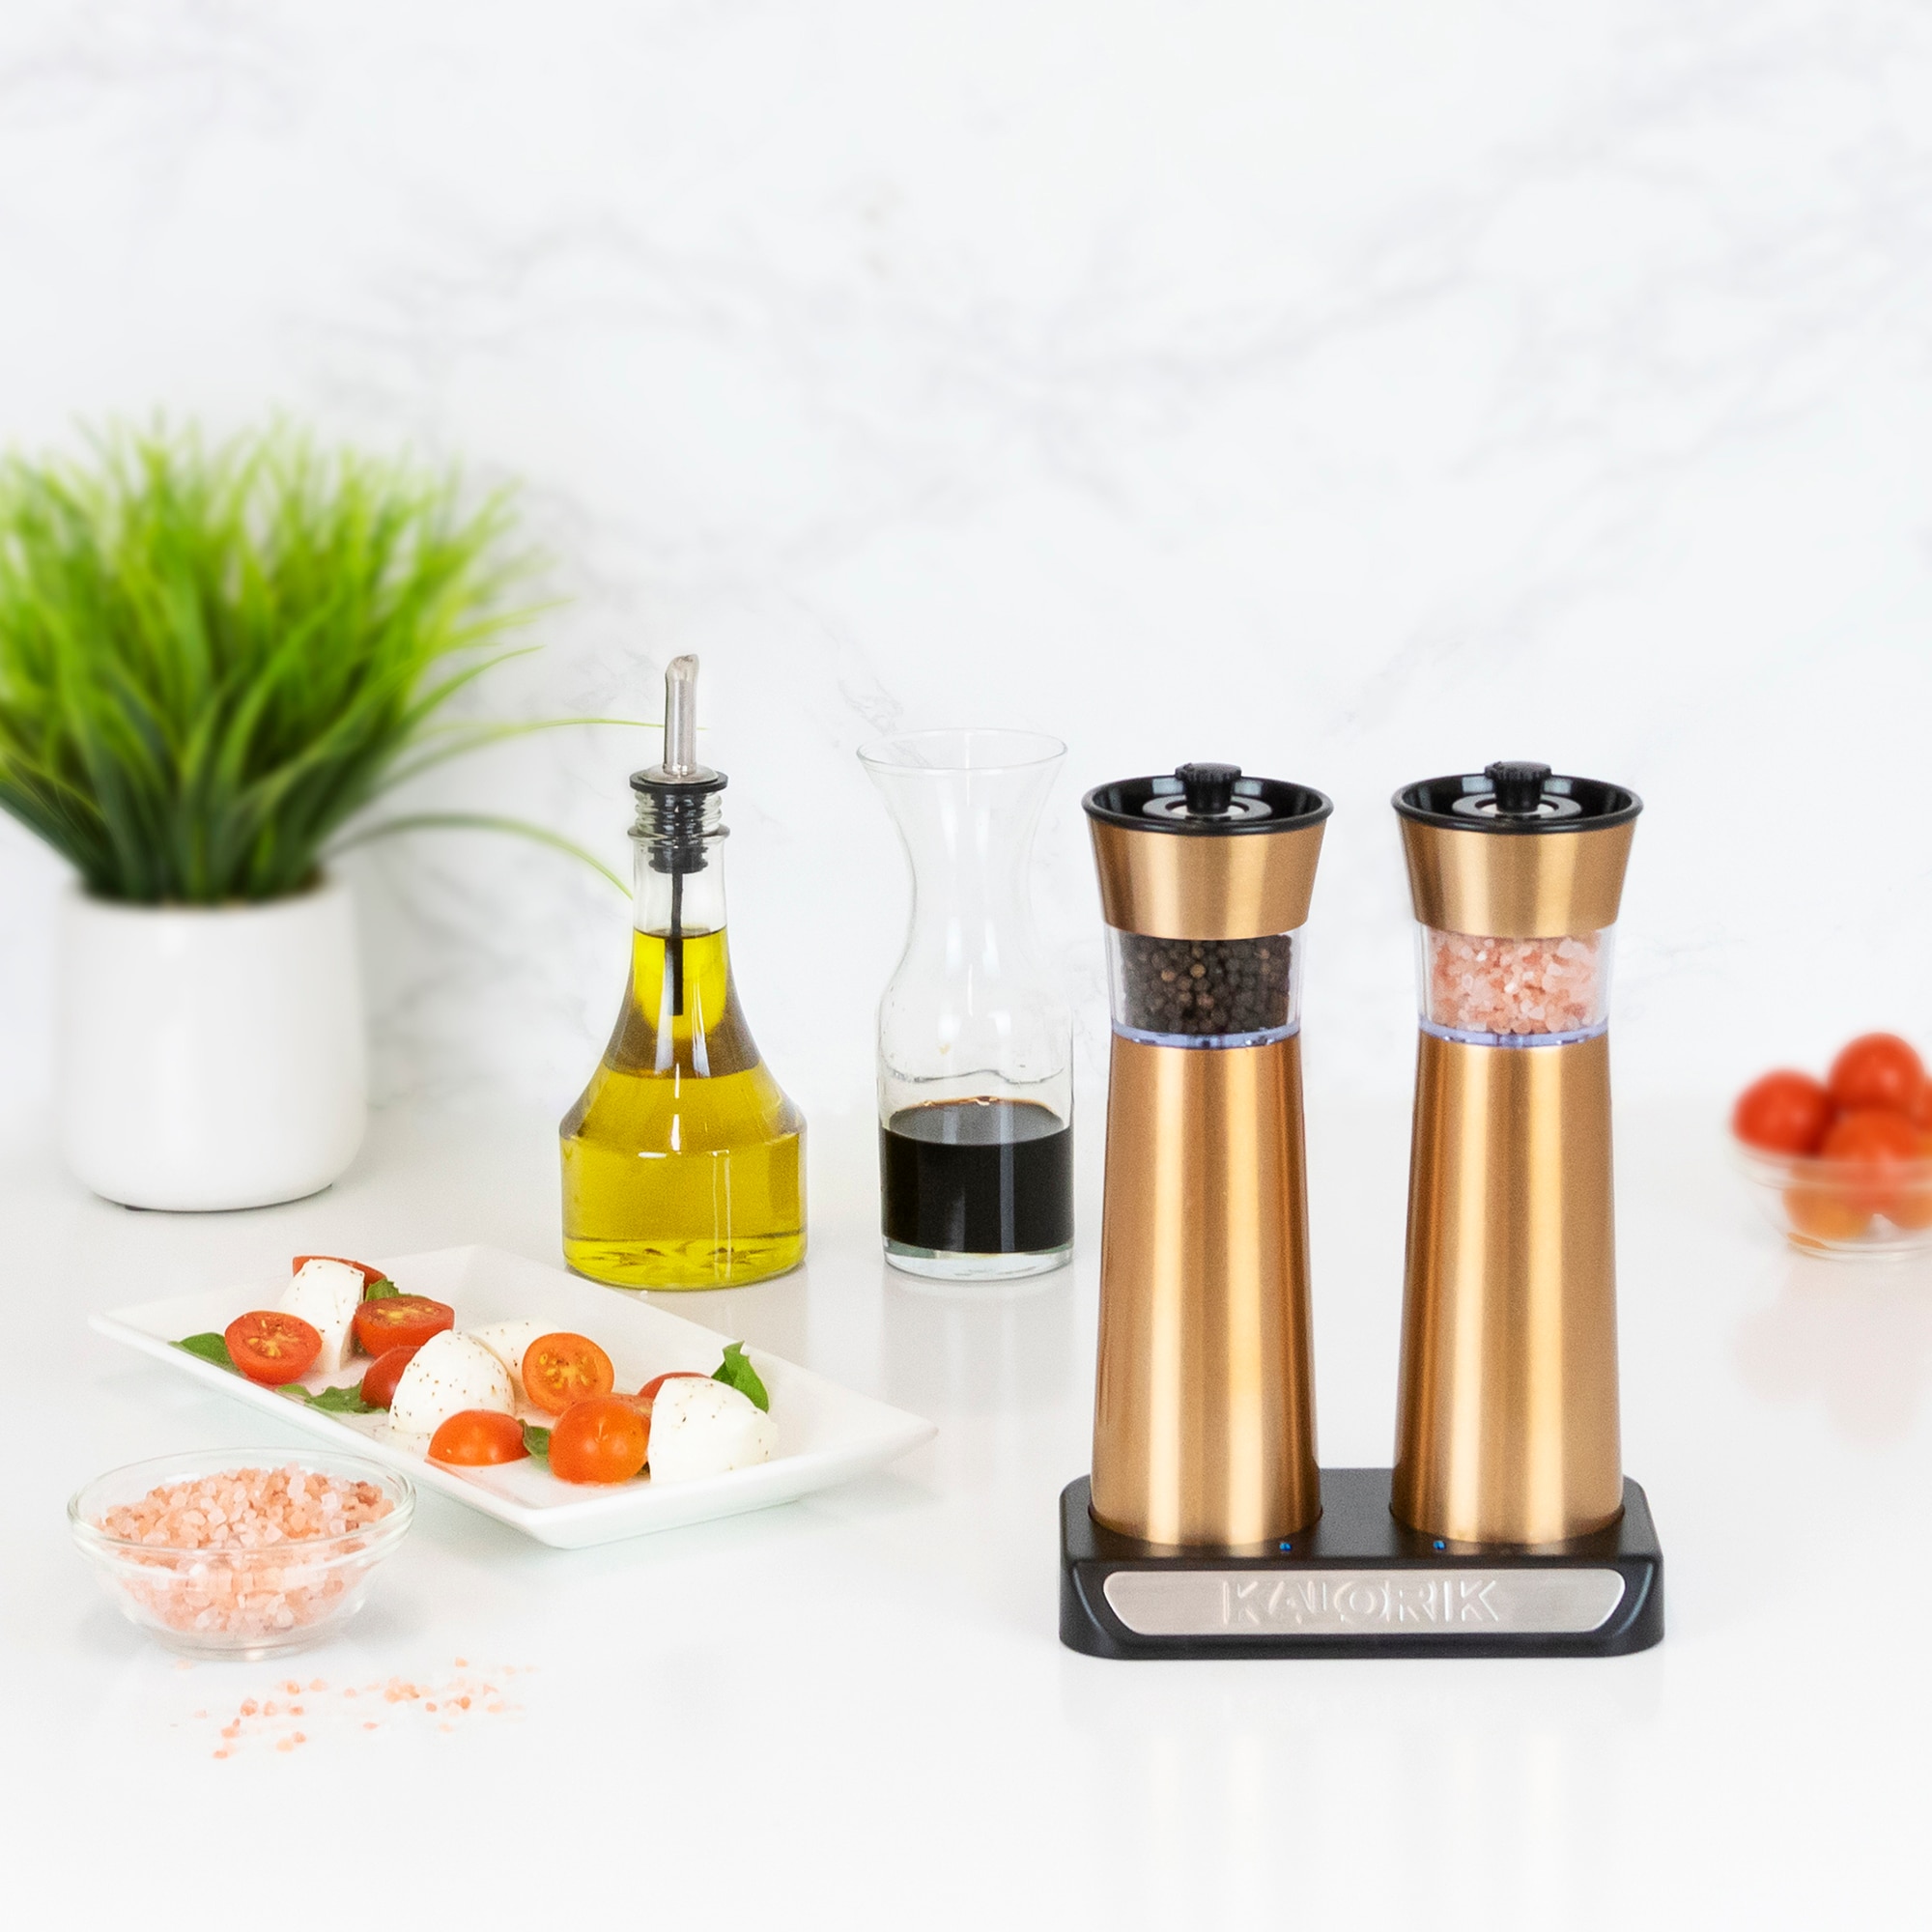 Brentwood Stainless Steel Electric Salt and Pepper Adjustable